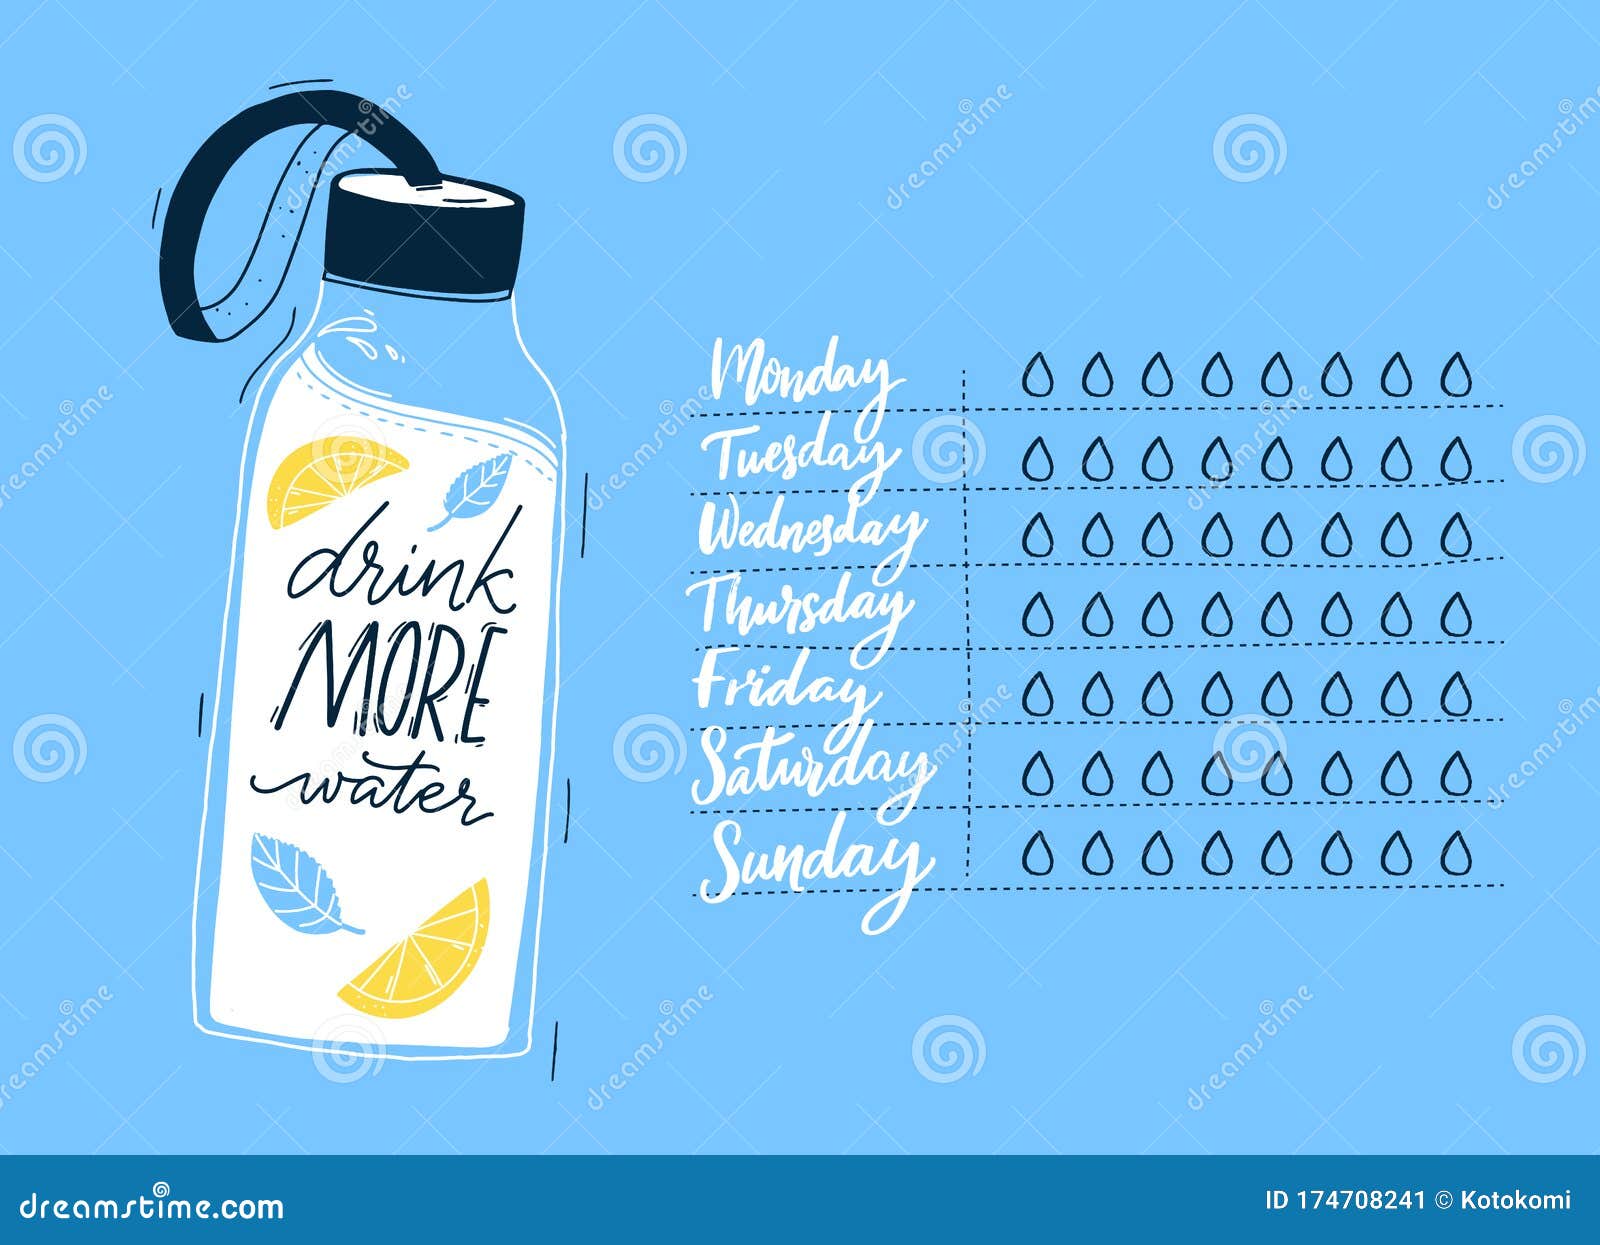 daily water tracker, handwritten days of week and checklist drops of water. reusable sport bottle  with